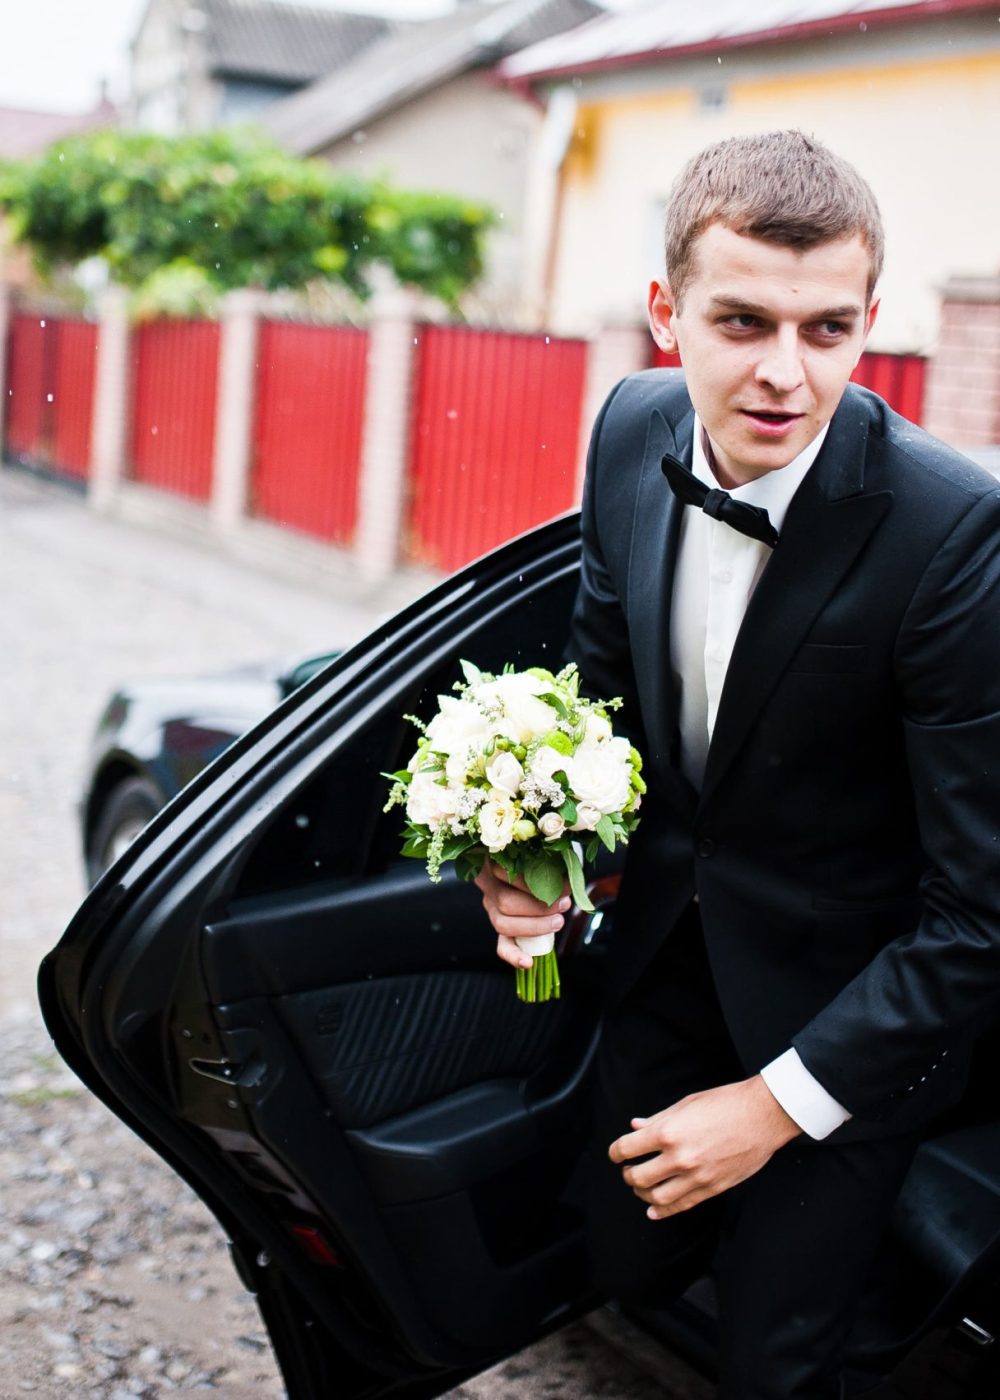 stylish-young-groom-out-of-the-wedding-car-in-rain-2021-09-02-12-44-44-utc (1)